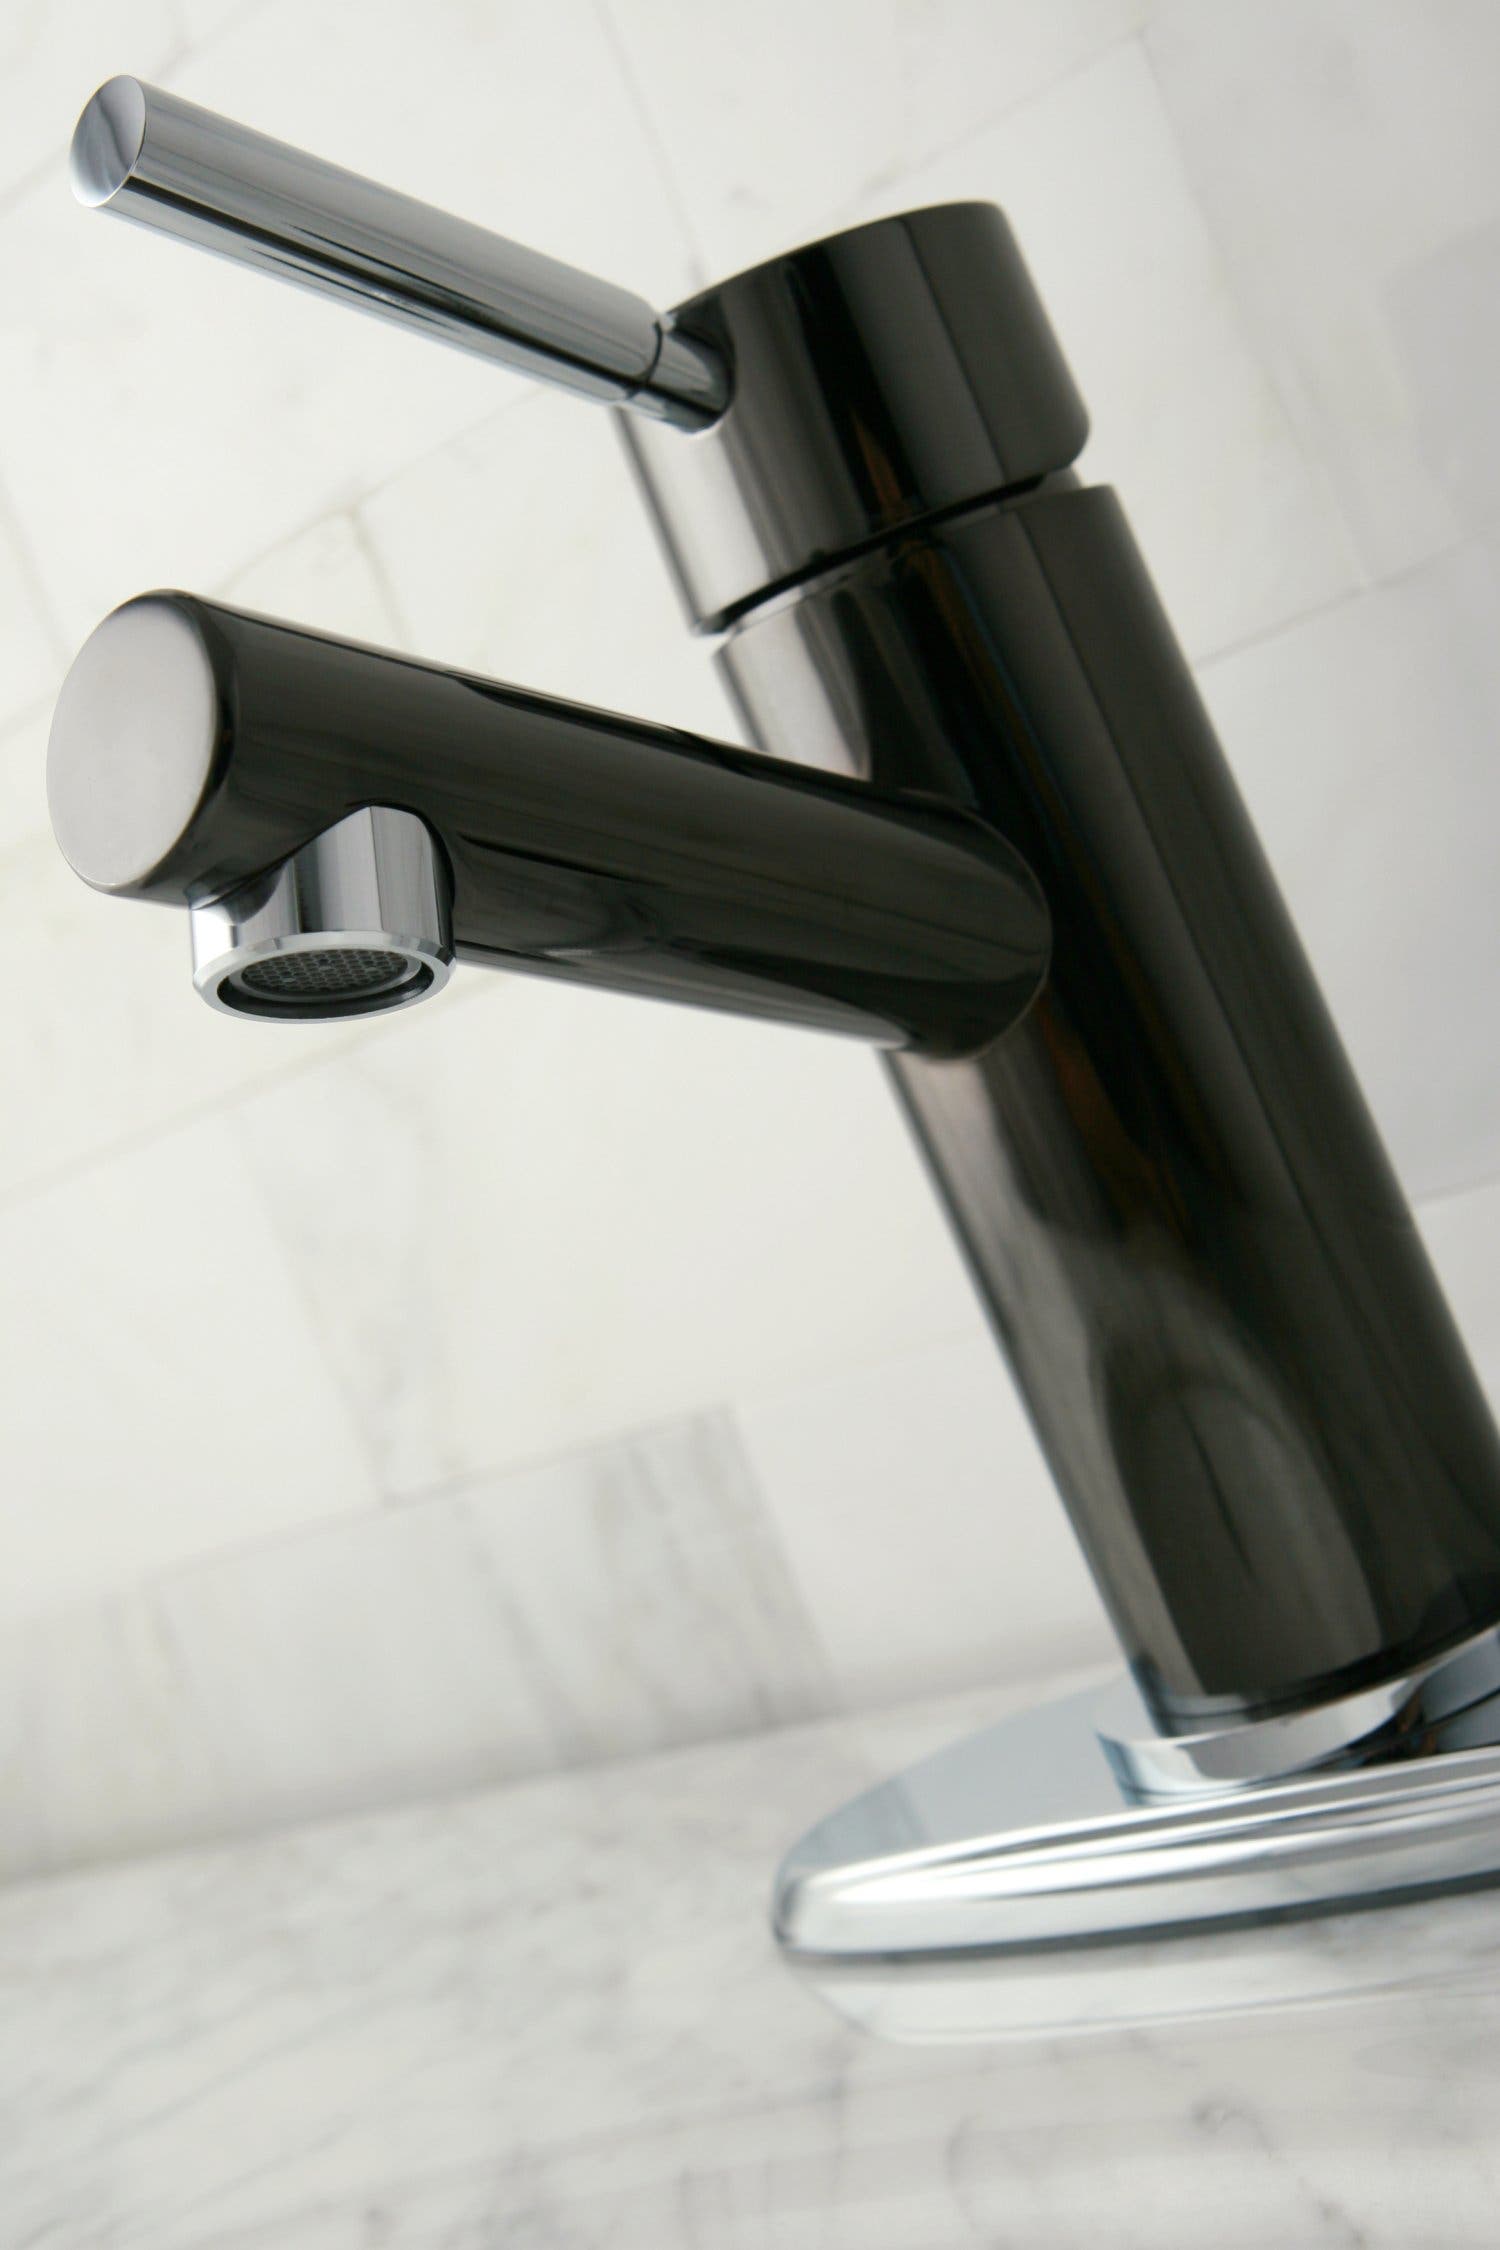 The Water Onyx Lavatory Faucet is Flawless, NS8427DL